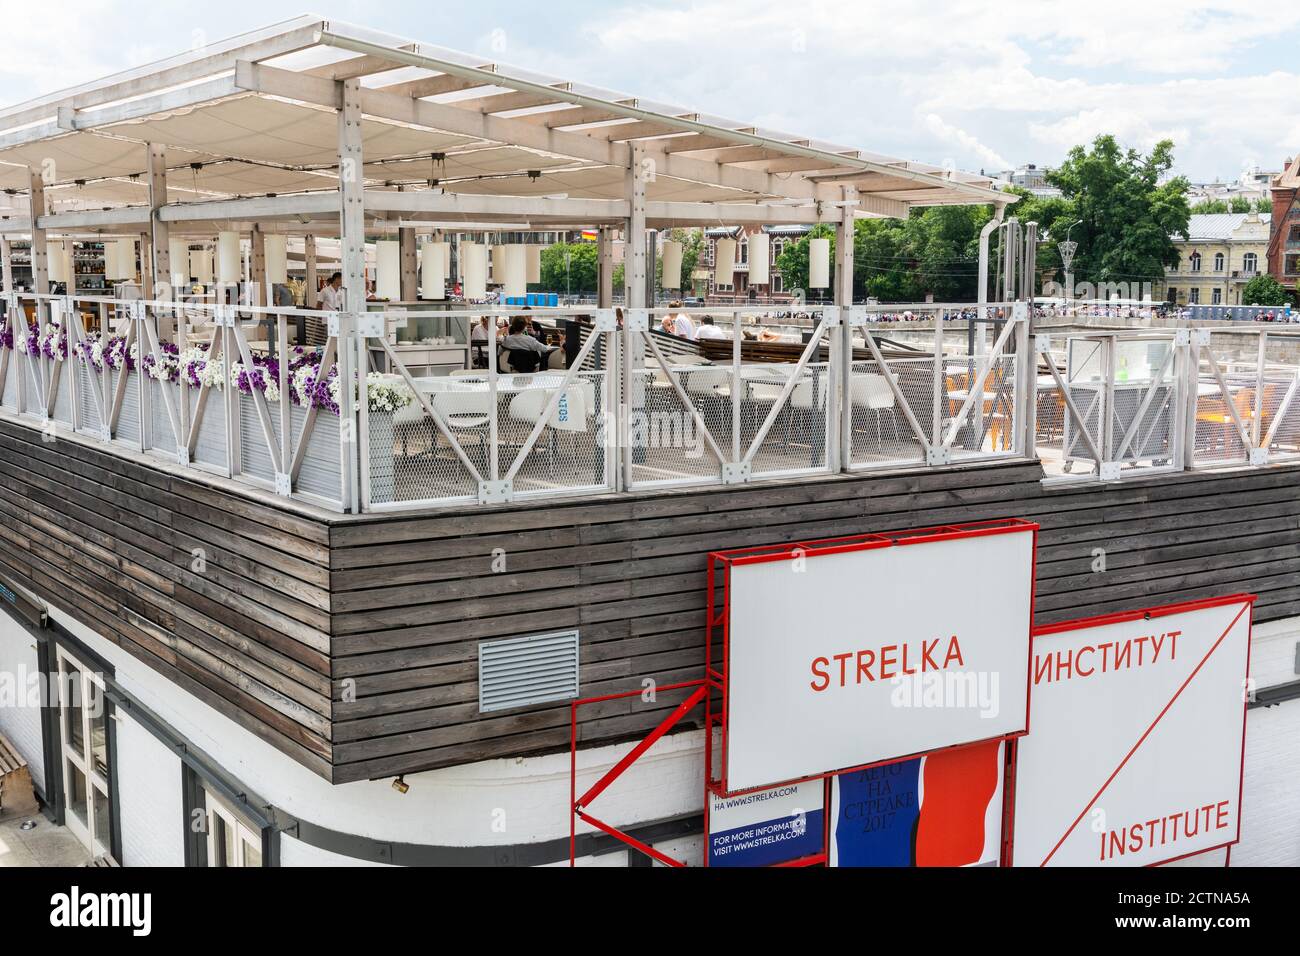 Moscow, Russia – June 11, 2017. Summer terrace of Strelka Bar, a part of Strelka Institute in Moscow. Strelka Institute for Media, Architecture and De Stock Photo